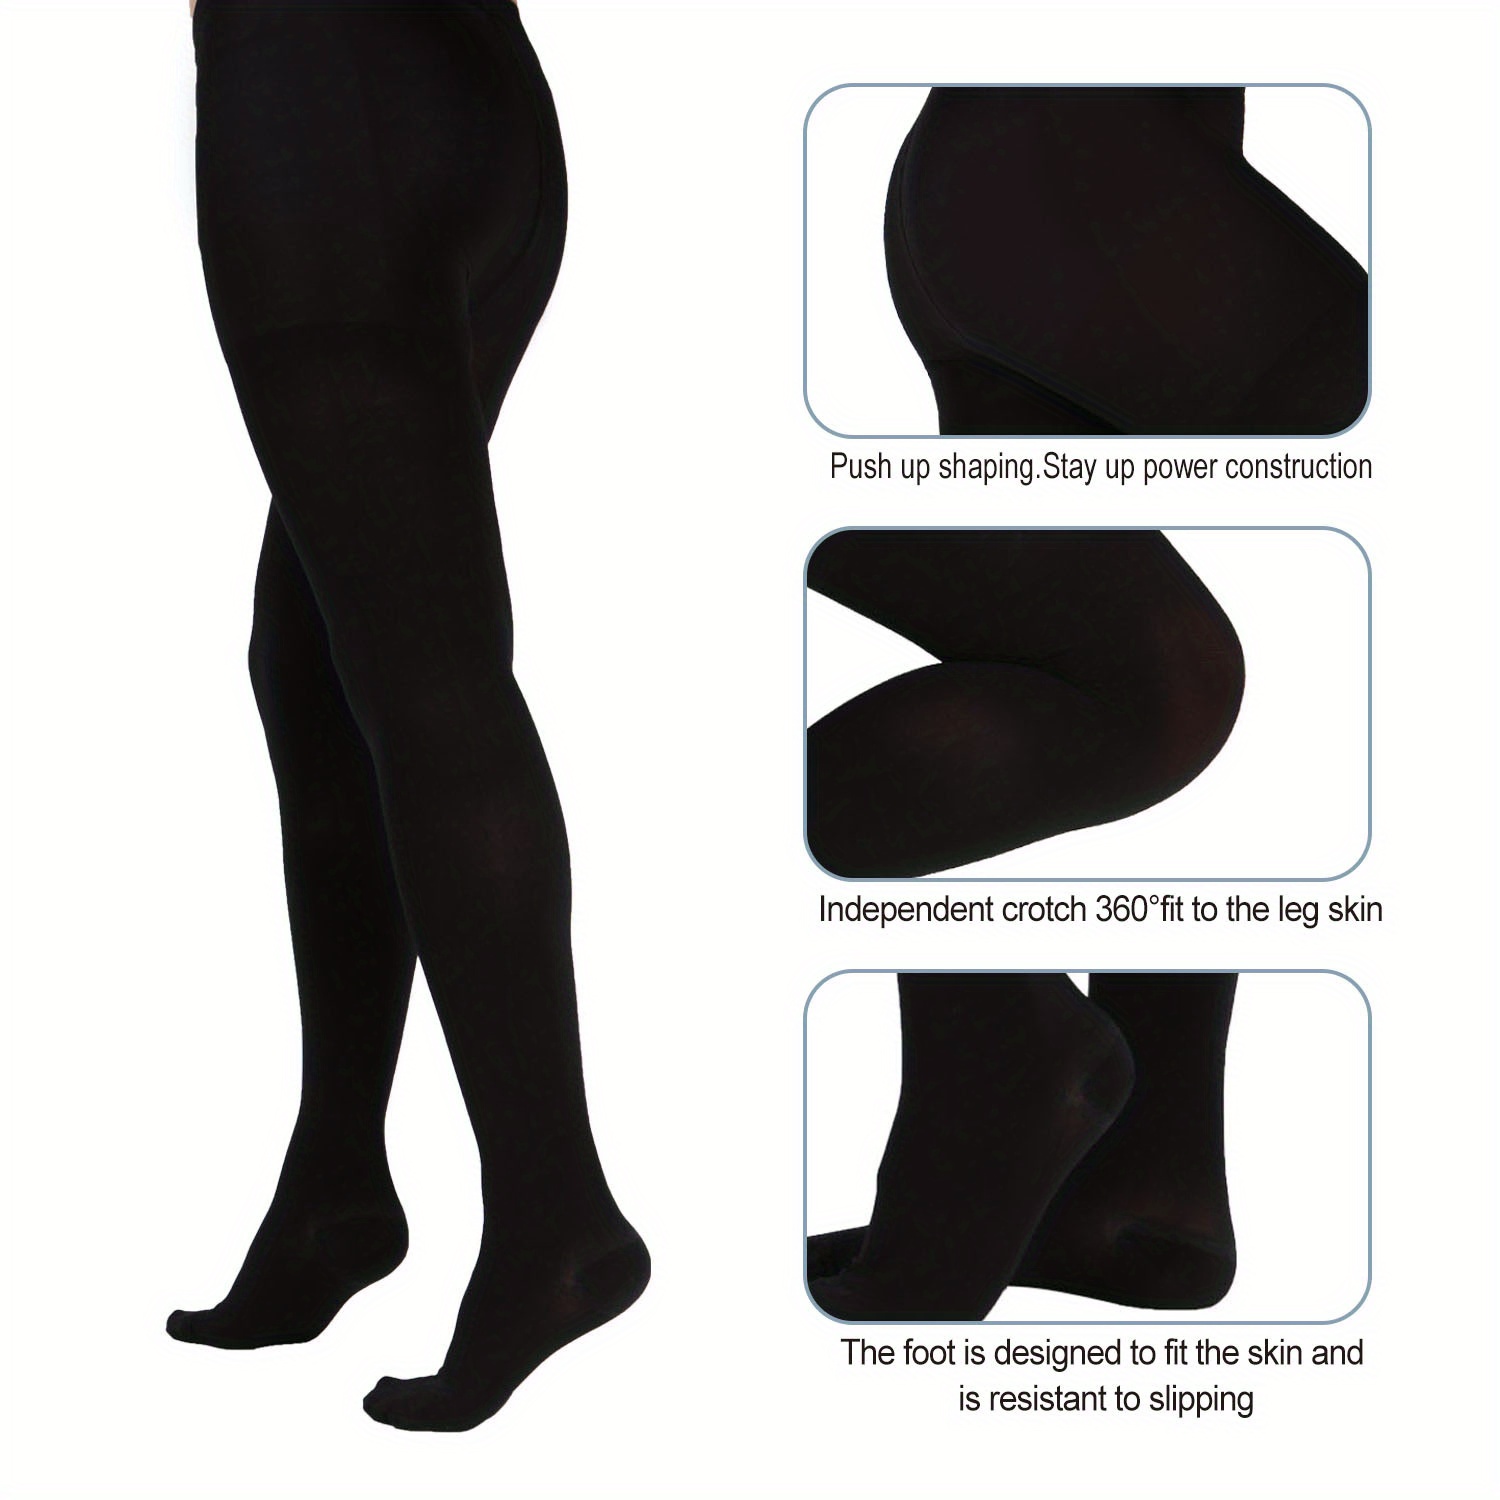 Know All About Lymphedema Stockings in Dubai, UAE - Sehaaonline